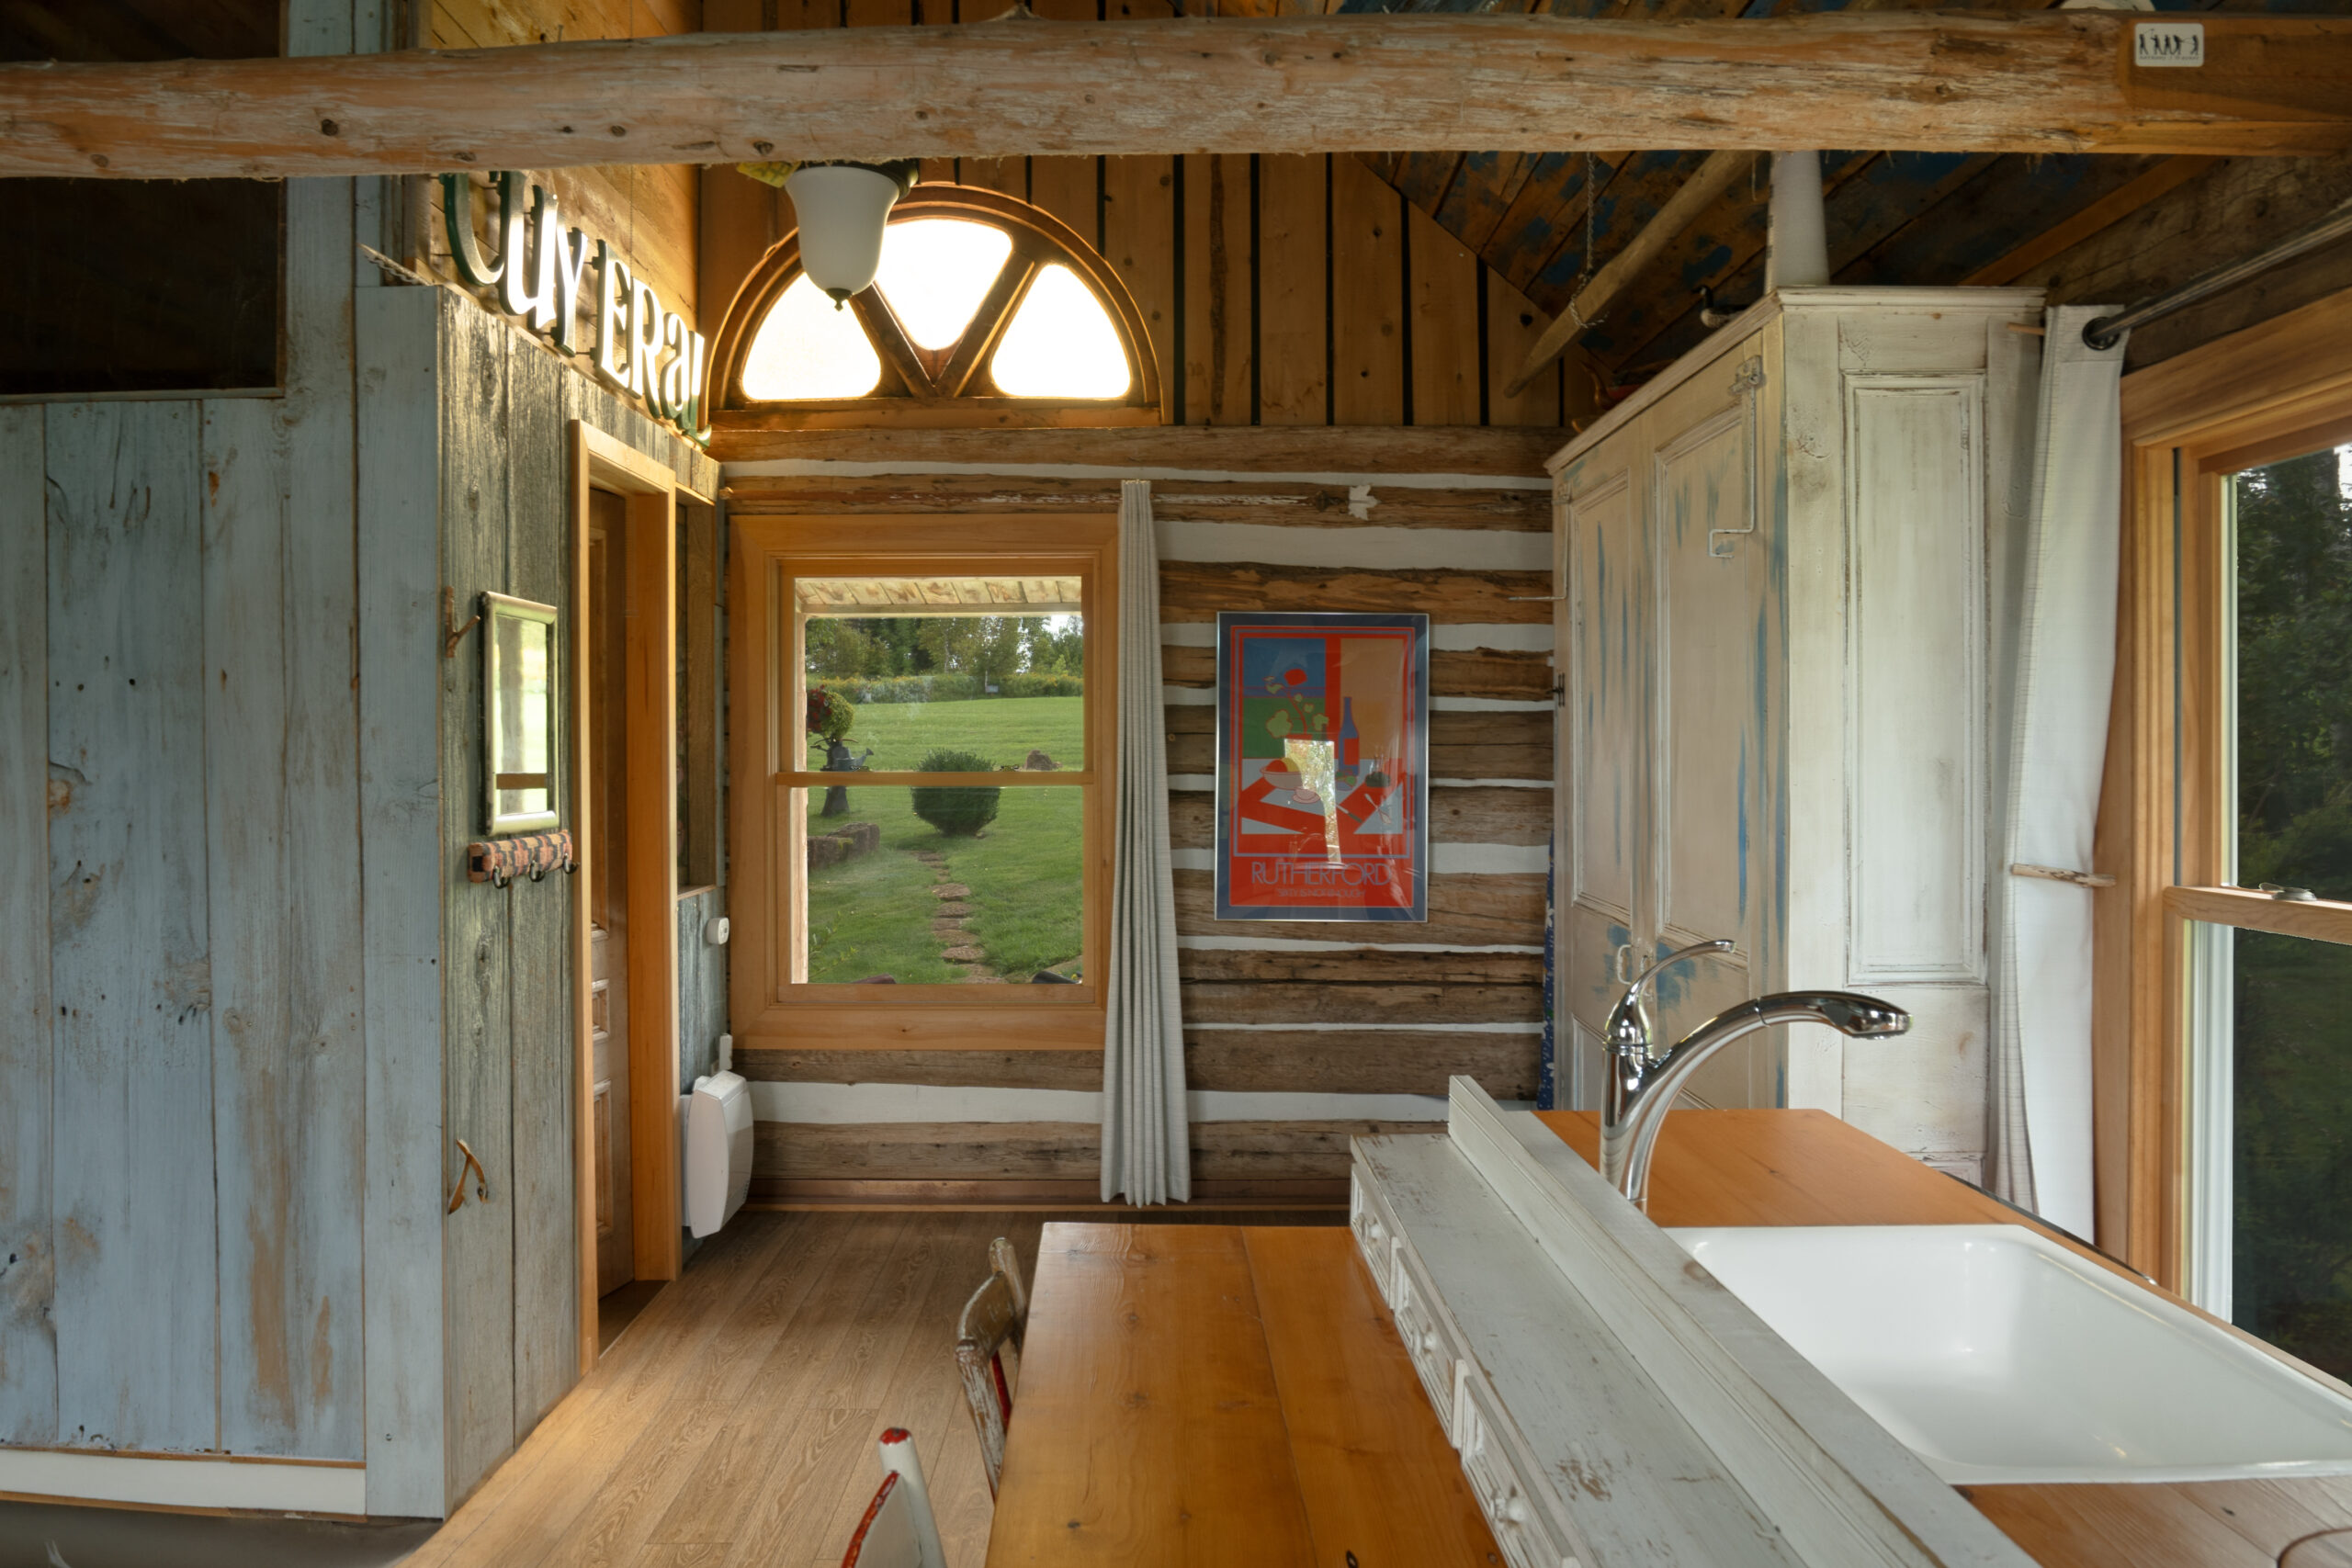 Interior of a small log cabin, with a table, a big window, a sink, and a storage cupboard.